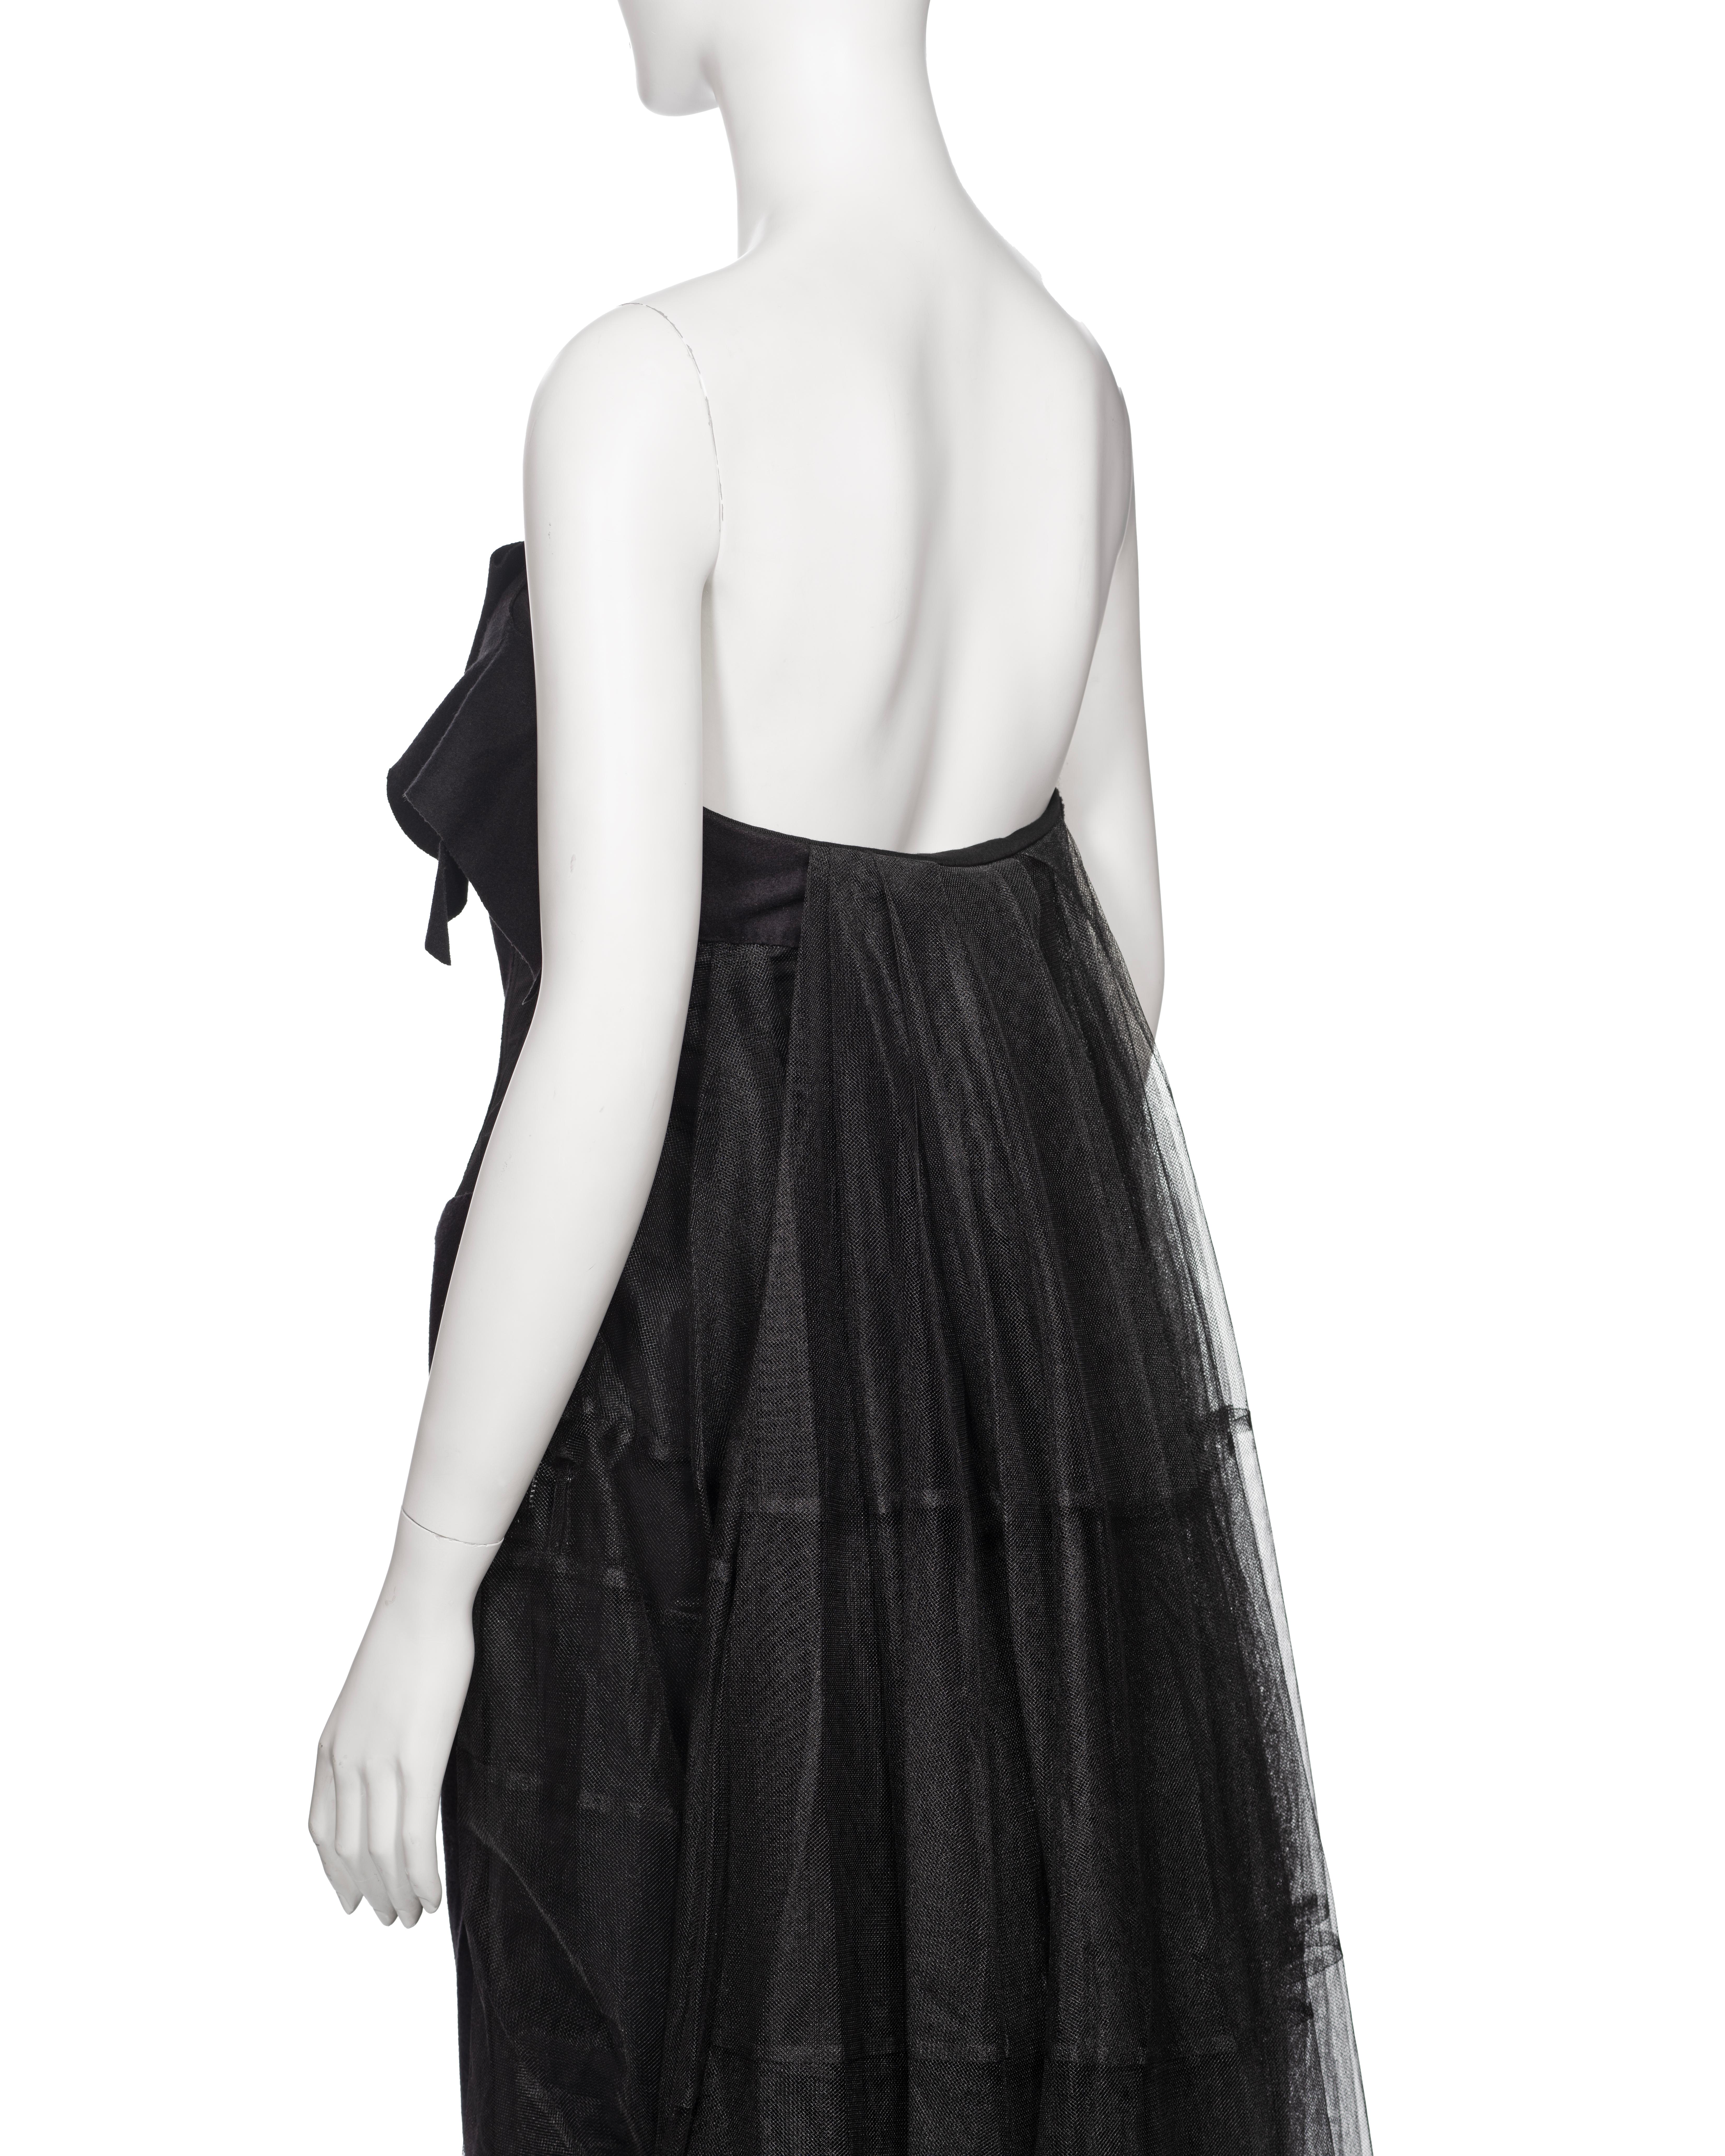 Louis Vuitton by Marc Jacobs Black Wool Strapless Dress with Petticoat, fw 2008 For Sale 7